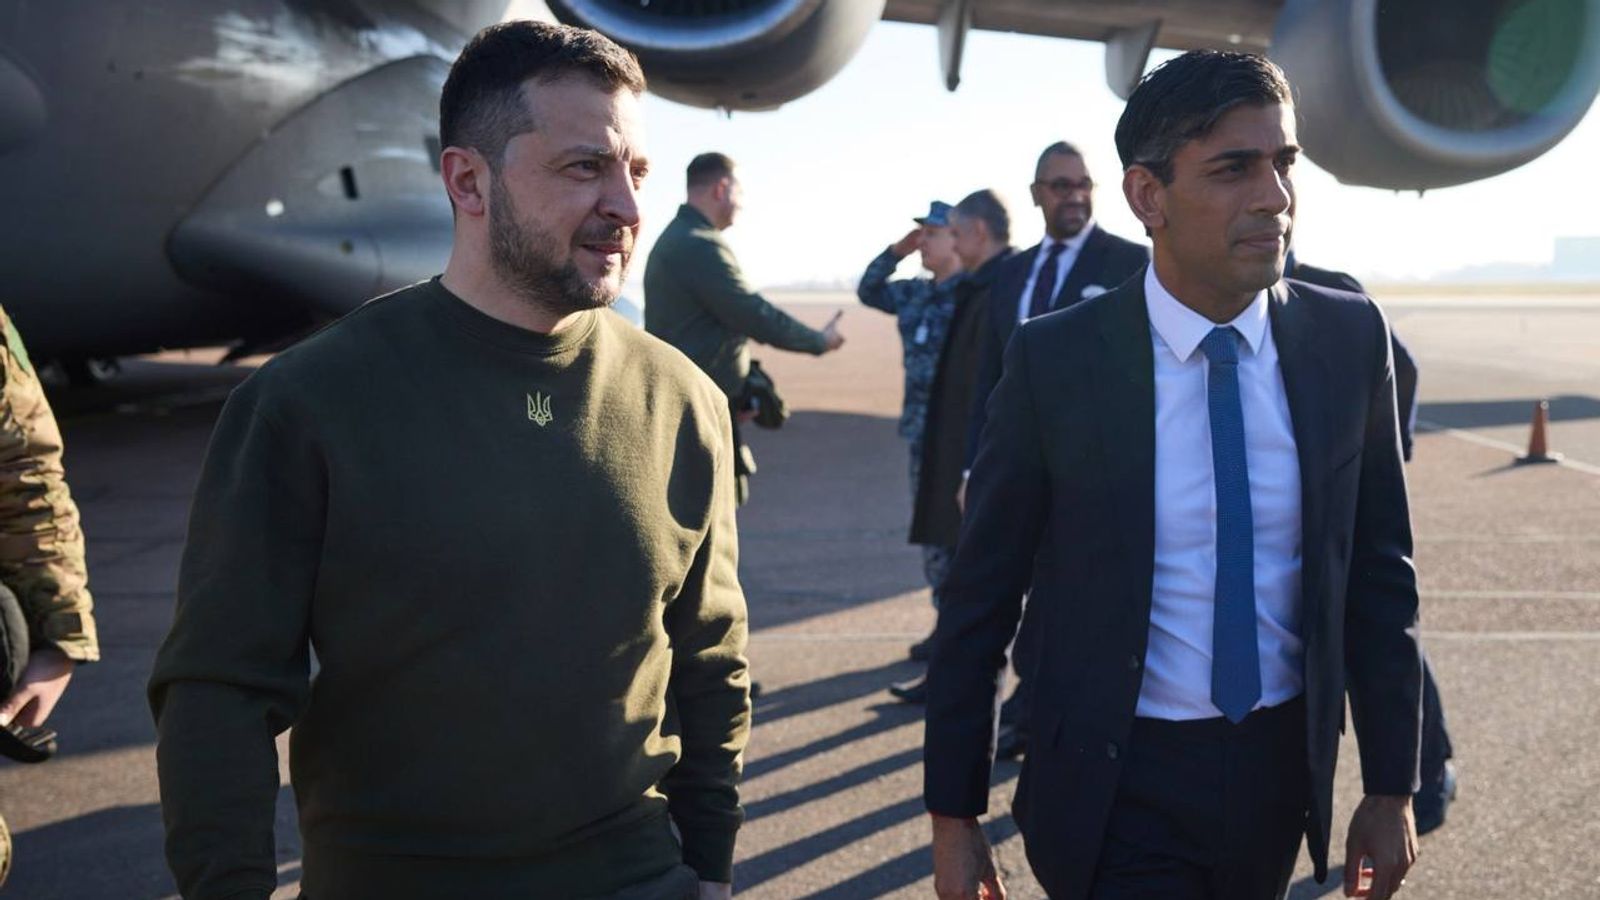 Ukrainian President Zelenskyy to hold talks with PM and King today in first UK visit since Russian invasion